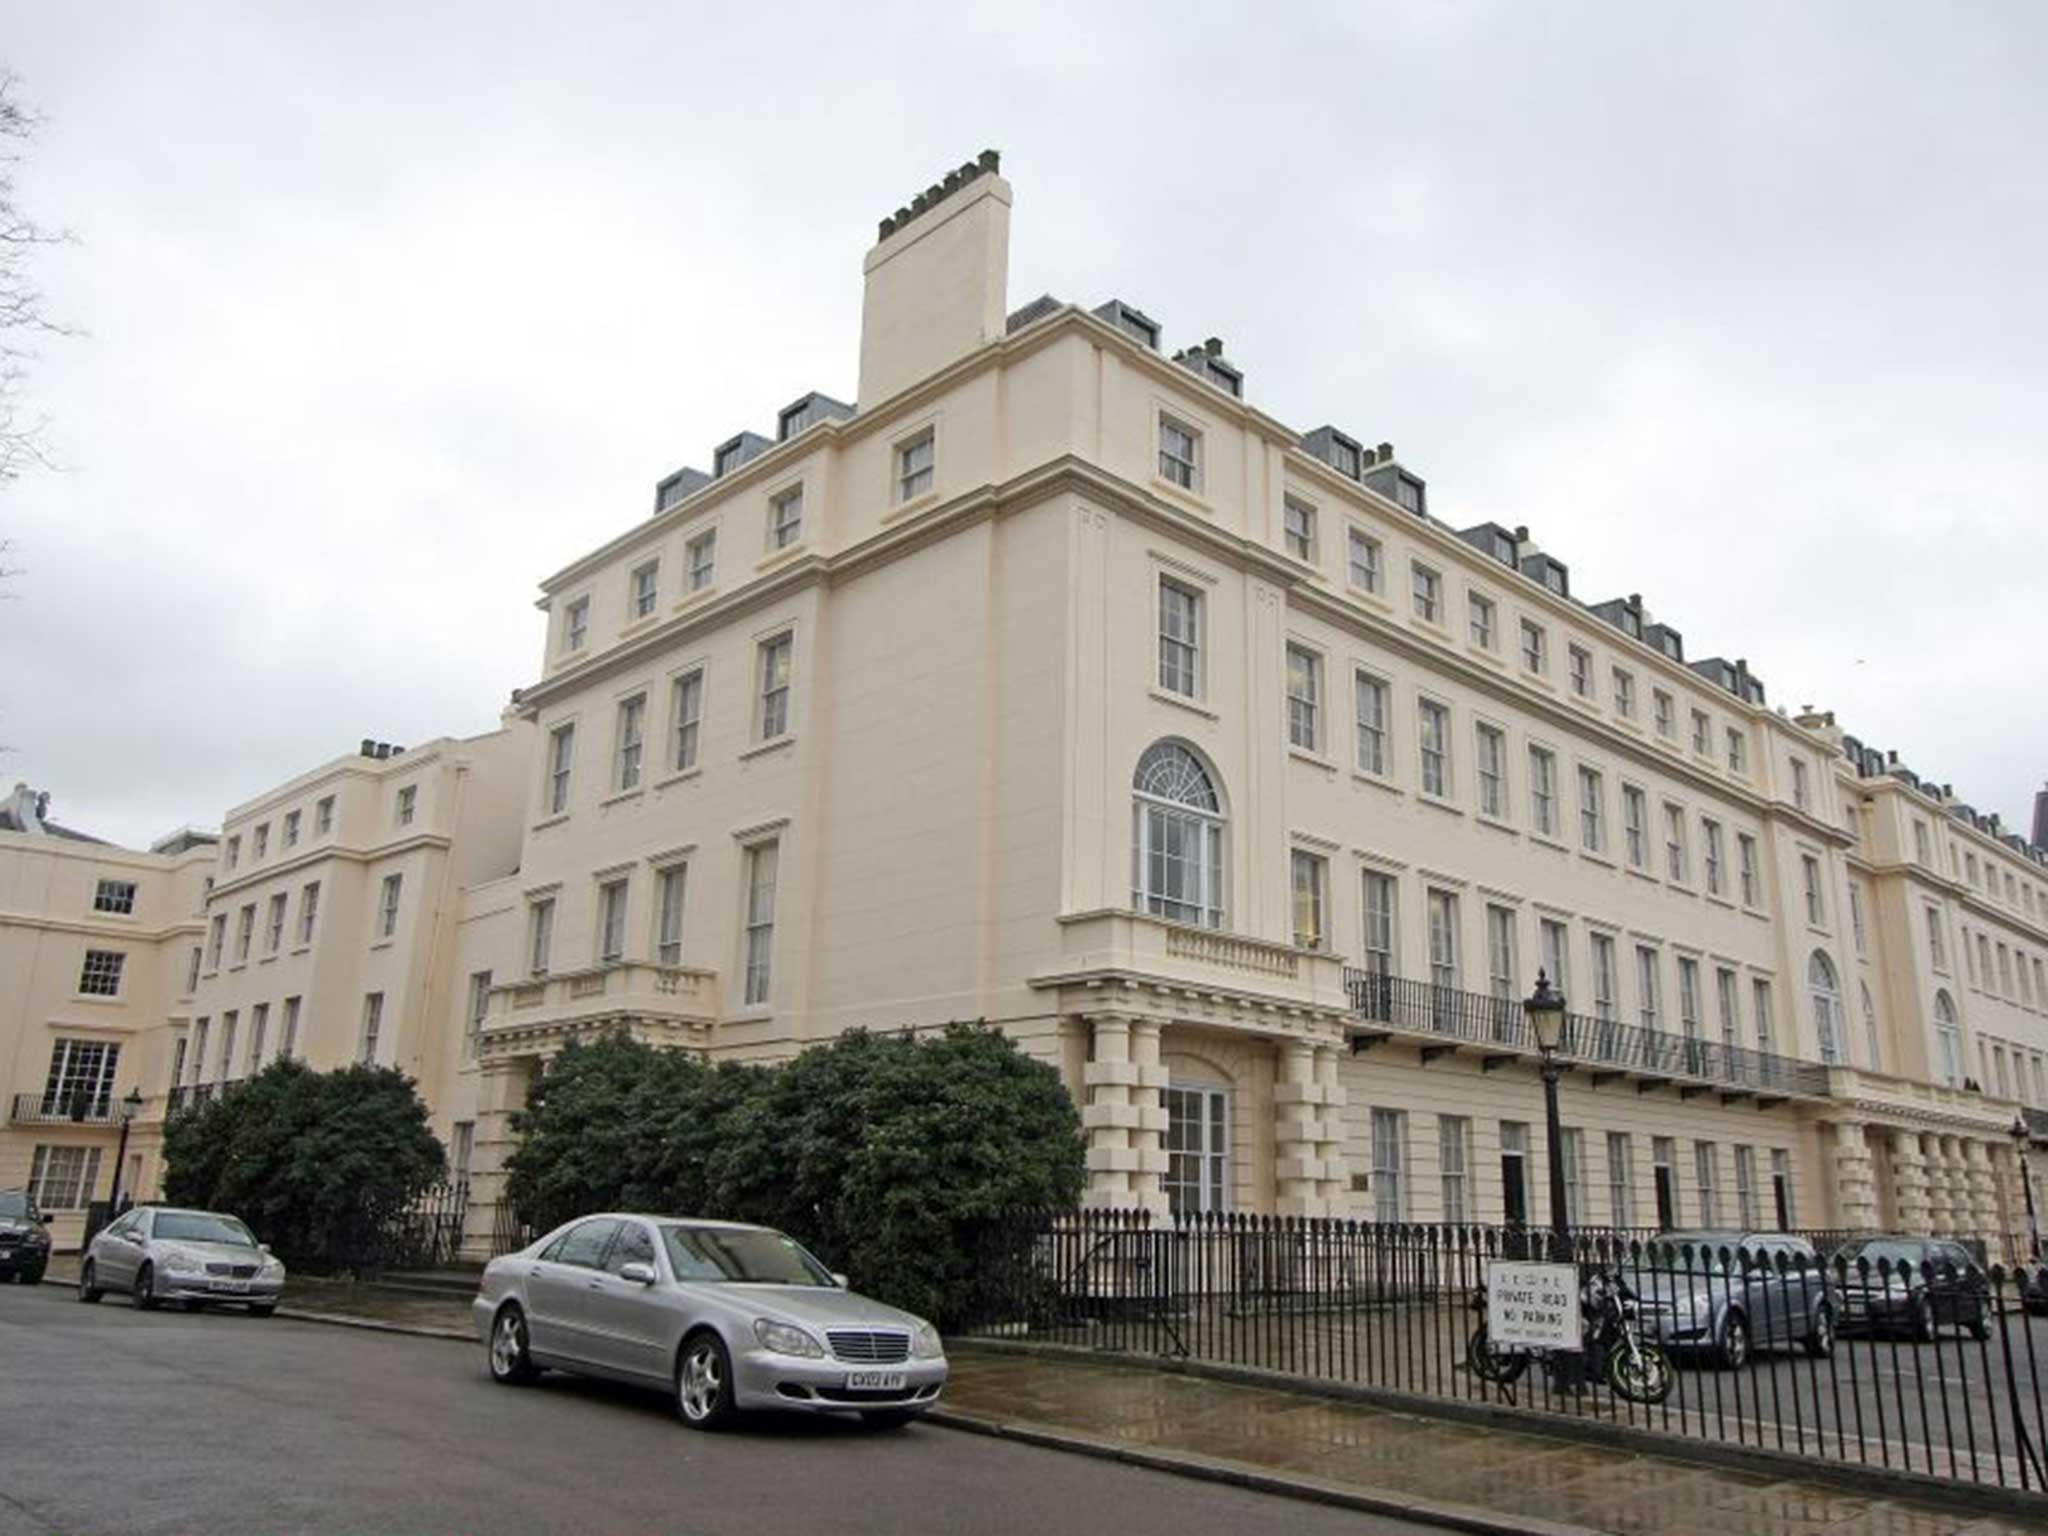 A Regent’s Park mansion on Chester Gate, which is one of London’s most expensive properties